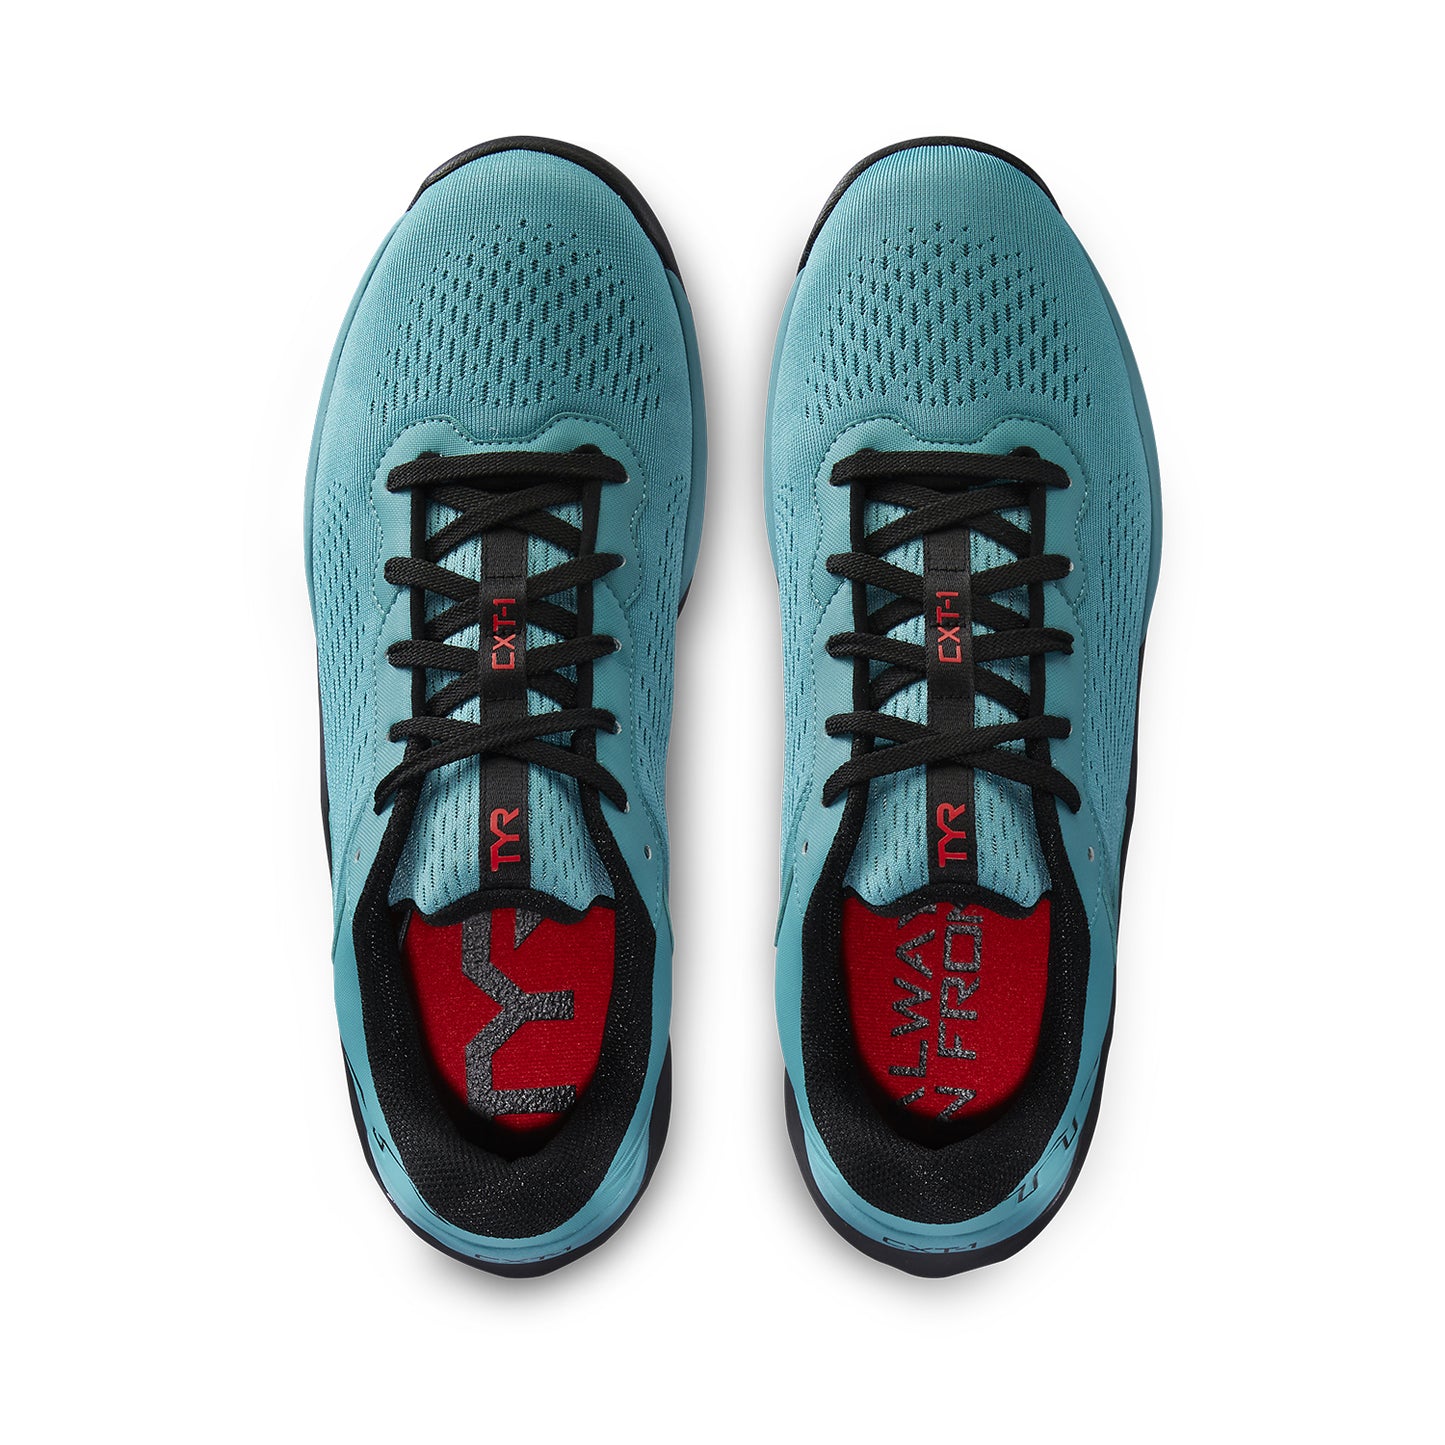 TYR CXT-1 Cross-training Shoes (342 Teal)